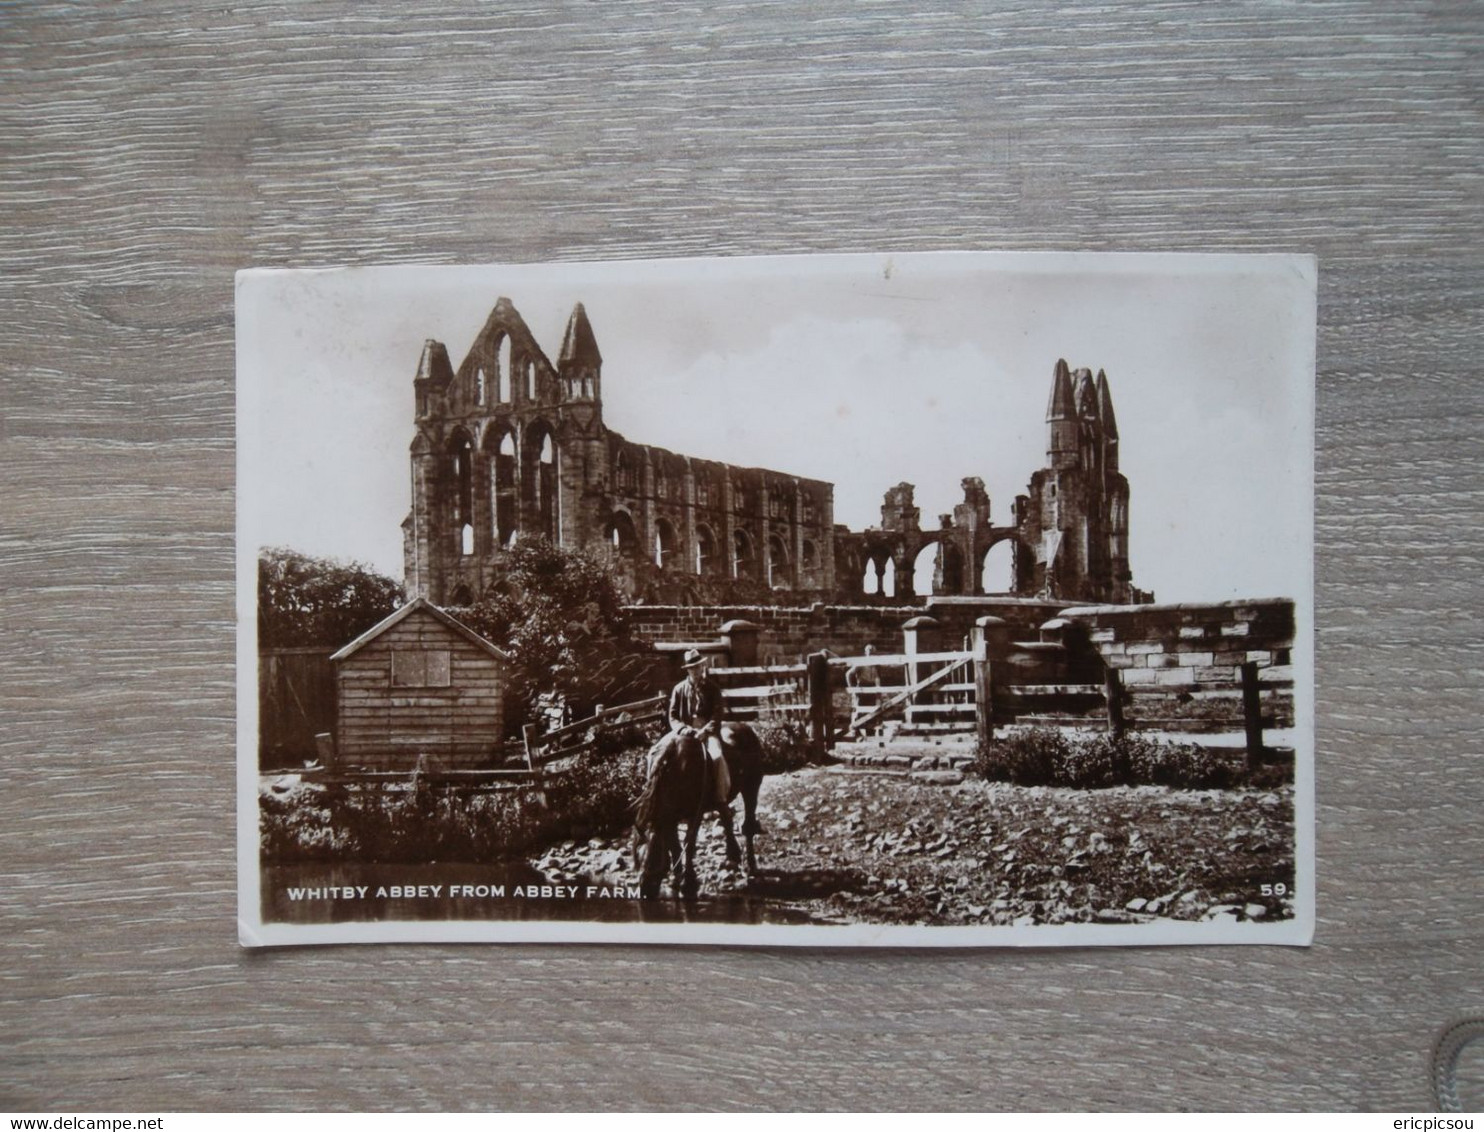 Whitby Abbey From Abbay Farm 1949 - Whitby